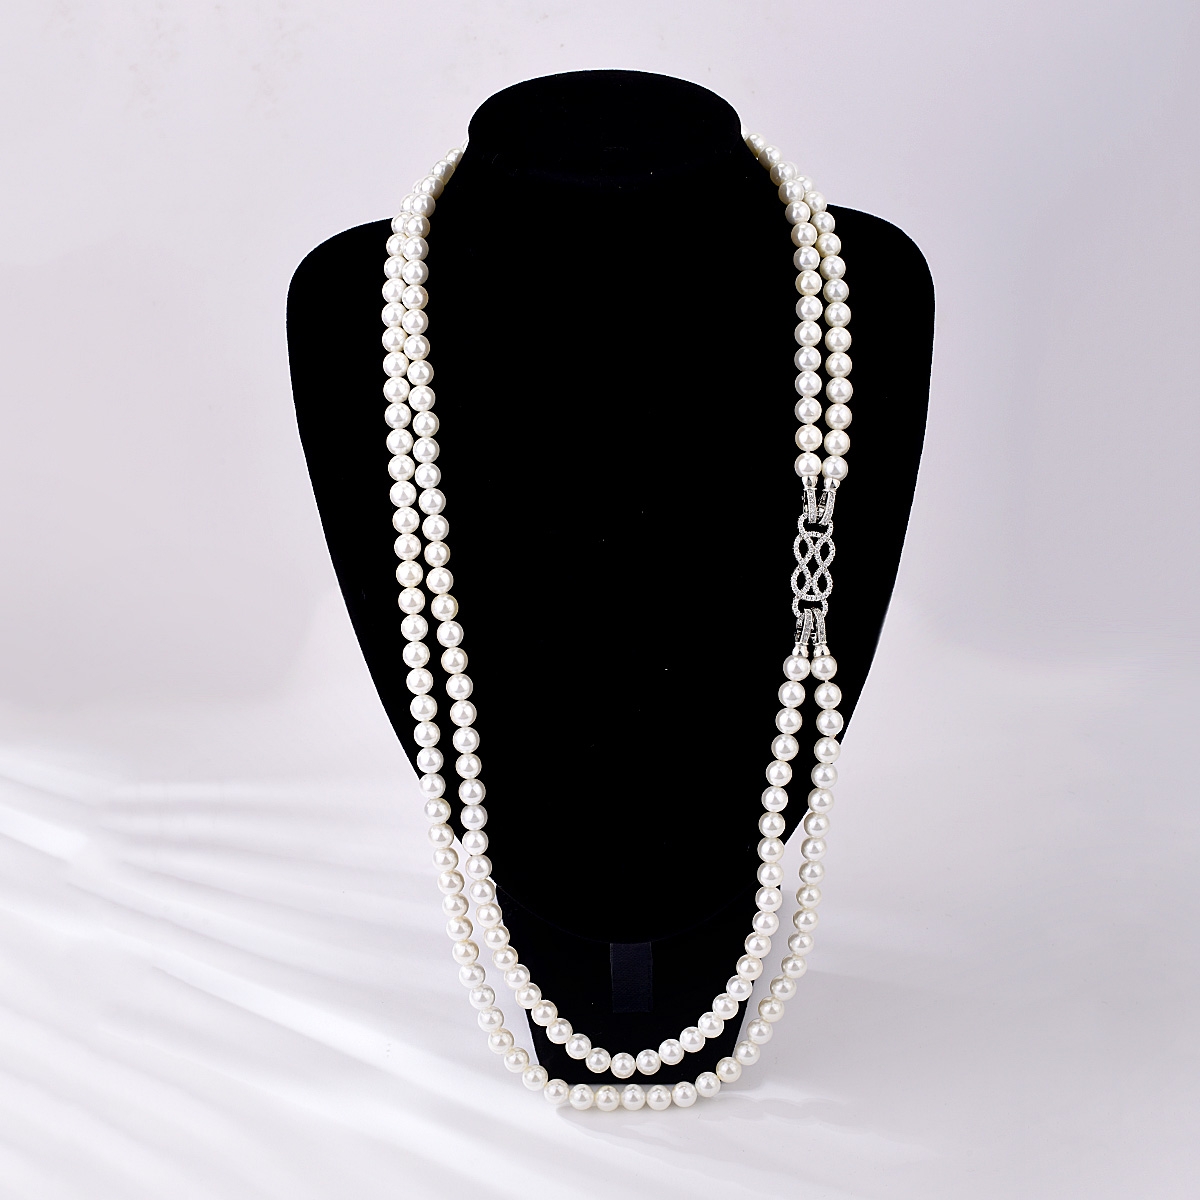 Impressive White Artificial Pearl Long Chain Necklace with Low MOQ